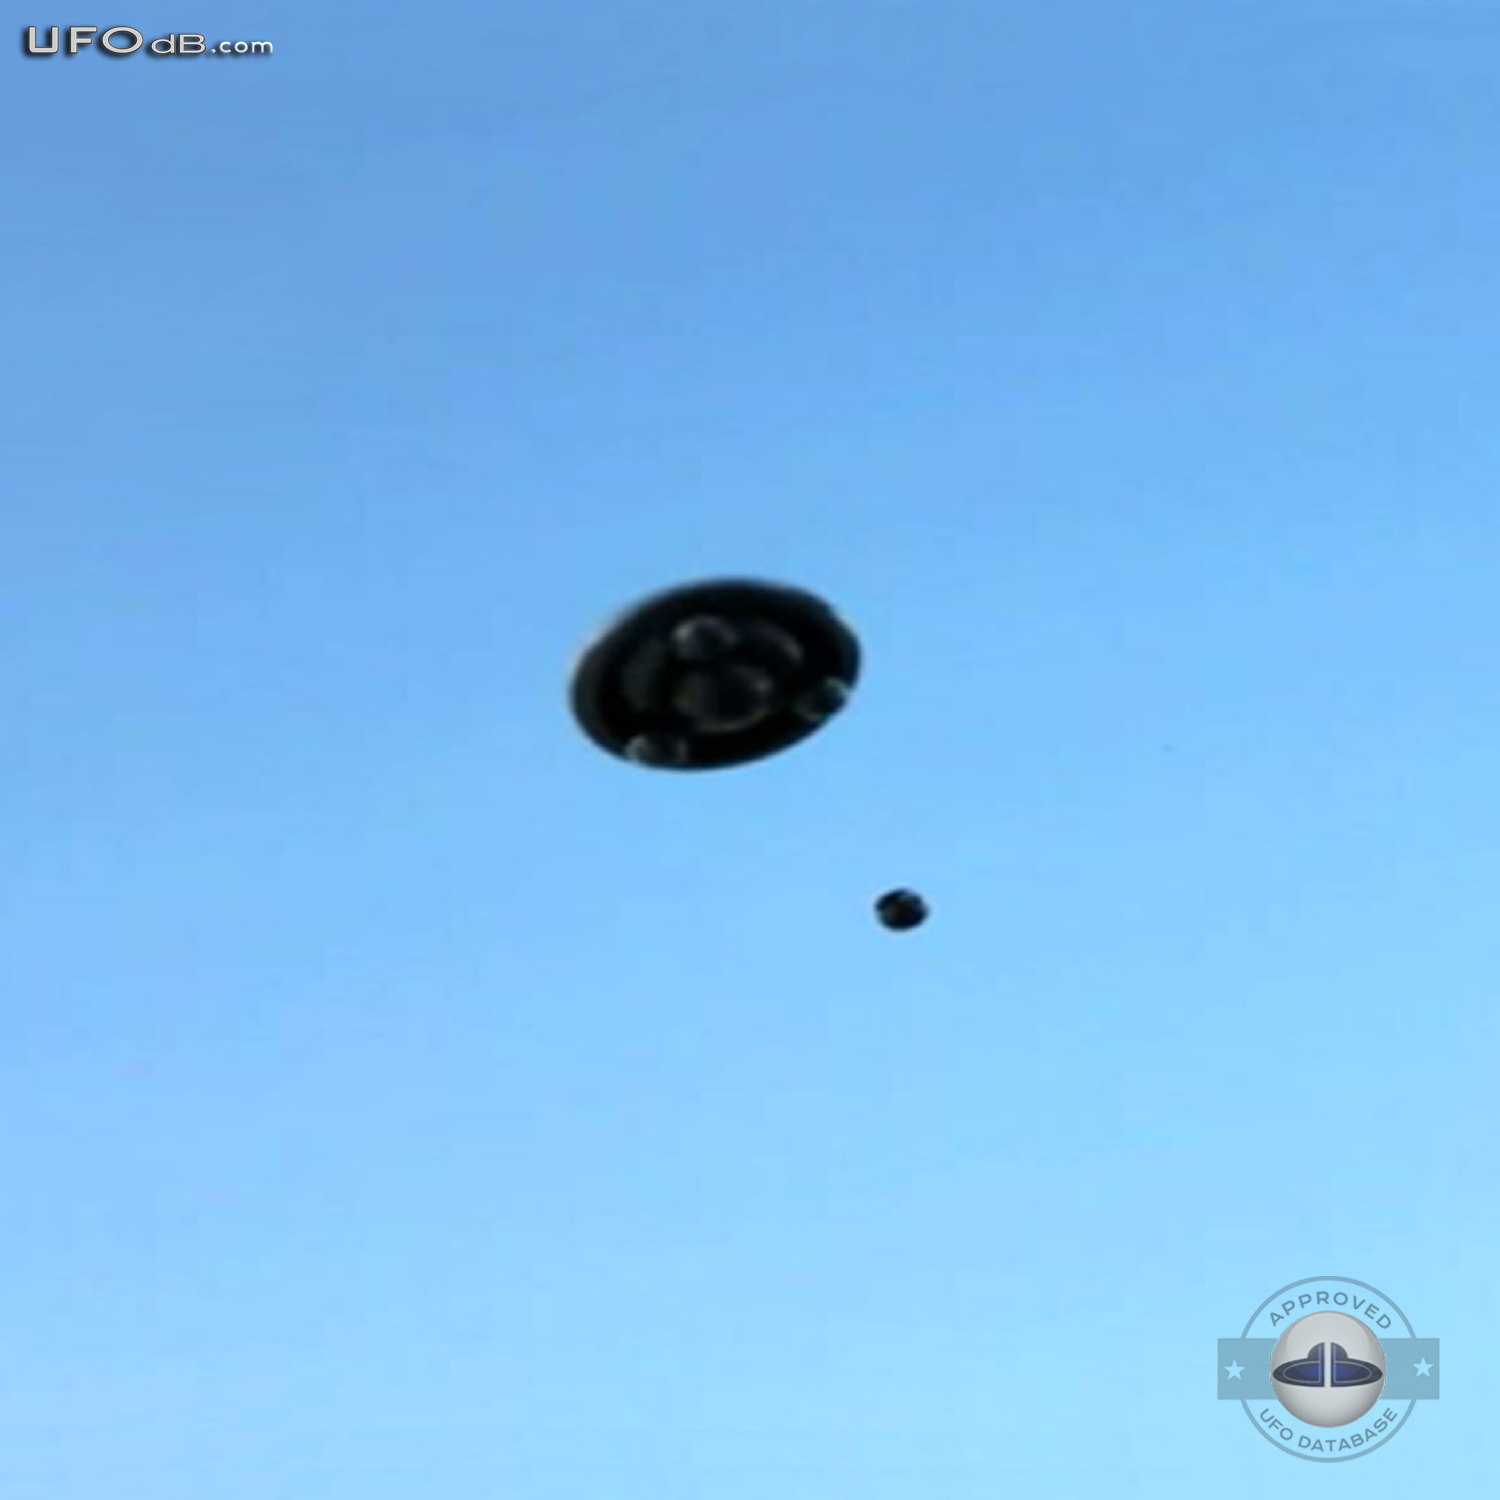 Italian UFO hunter captures on pictures a great 2011 UFO sighting UFO Picture #372-2